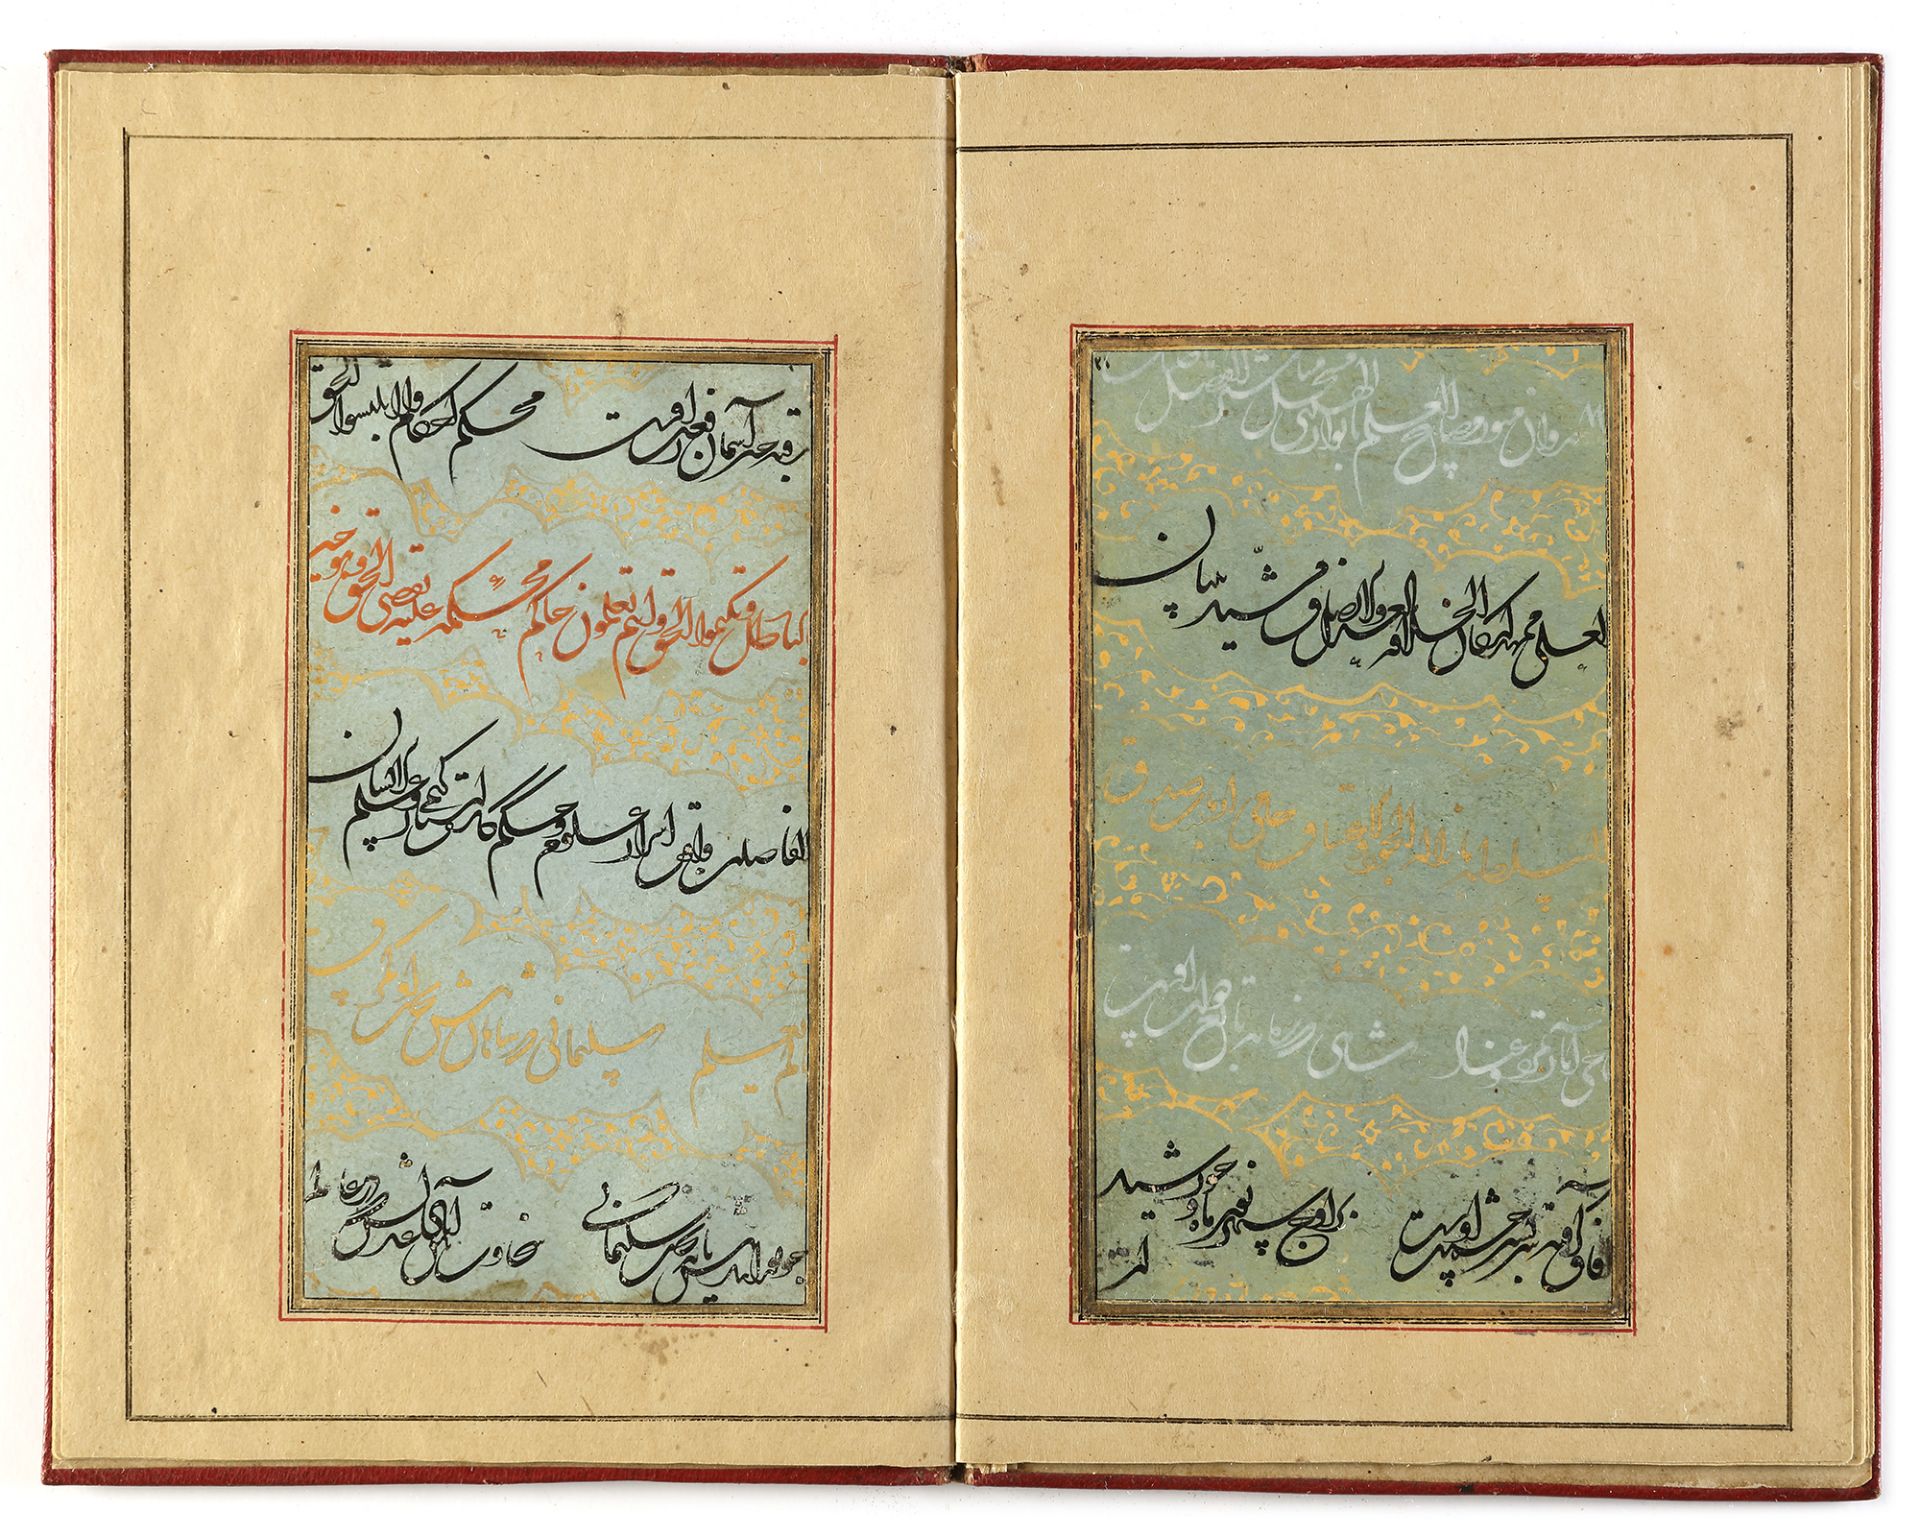 A MANUSCRIPT OF POETRY, SIGNED BY IKHTIYAR AL-MUNSHI, PERSIA, SAVAFID, DATED 975 AH/1567-68 AD - Image 8 of 18